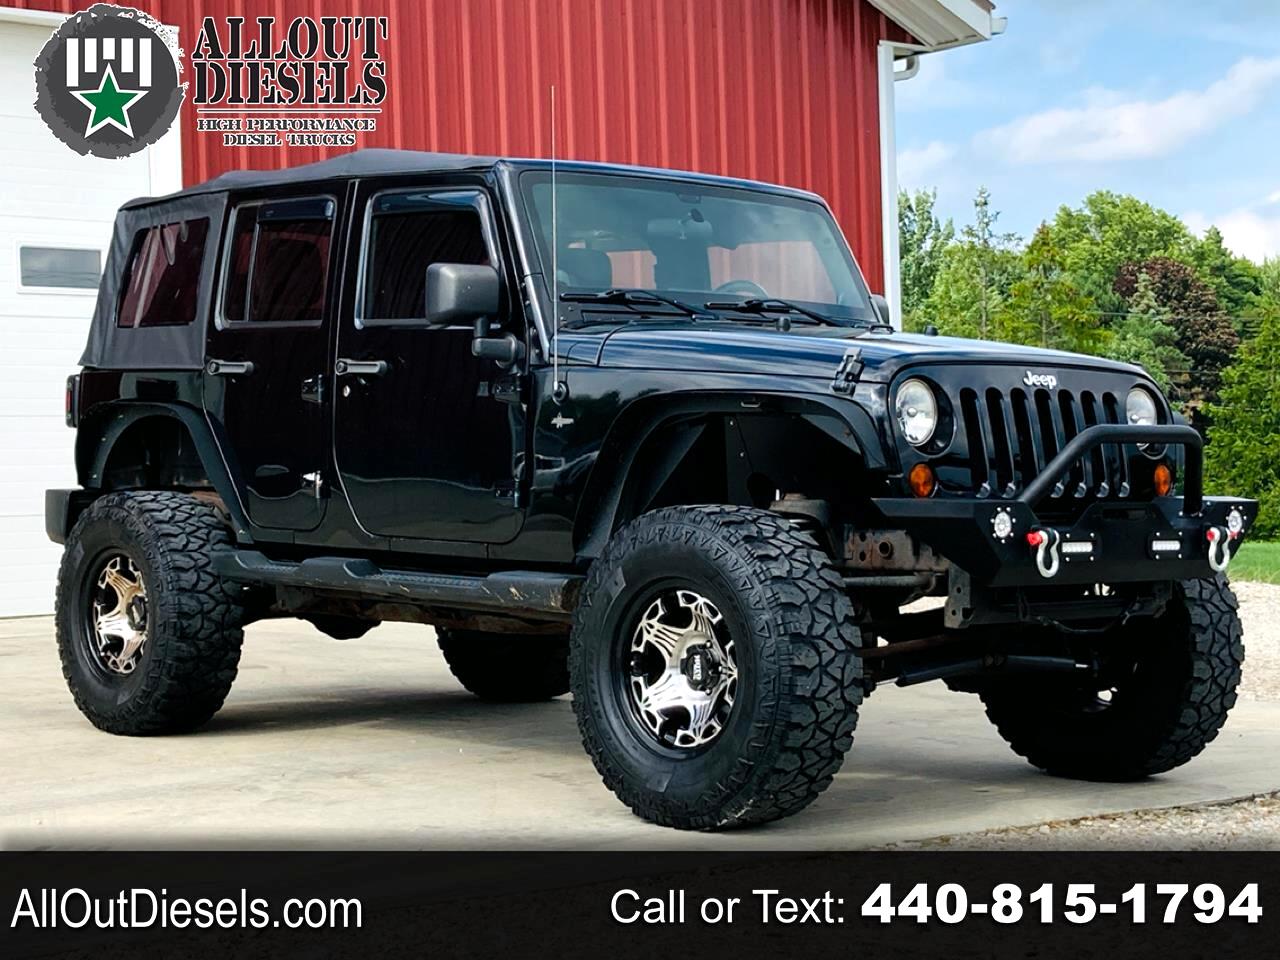 Jeep Wrangler Unlimited  2012